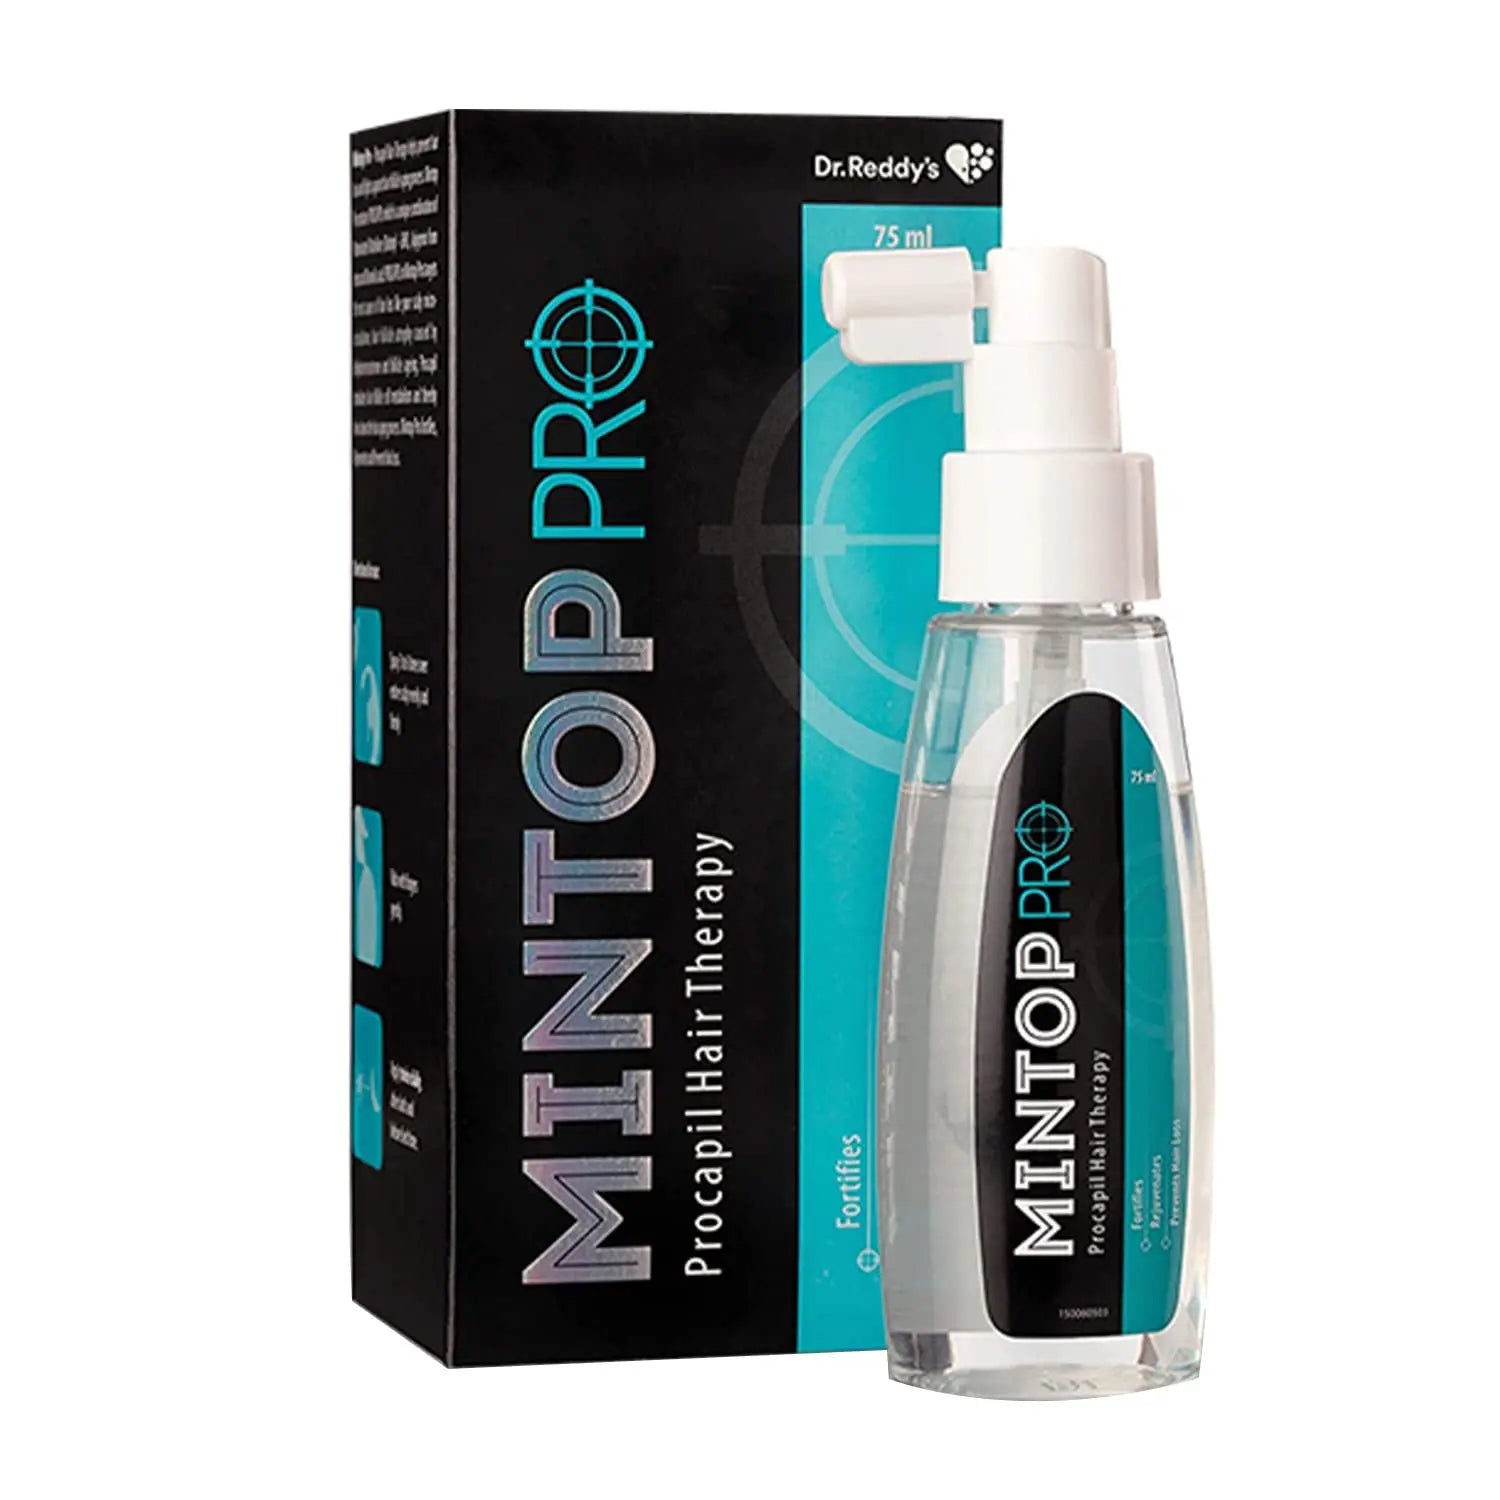 Mintop Pro Hair Serum - 75ml, With Proactive Hair Therapy Dr.Reddy's